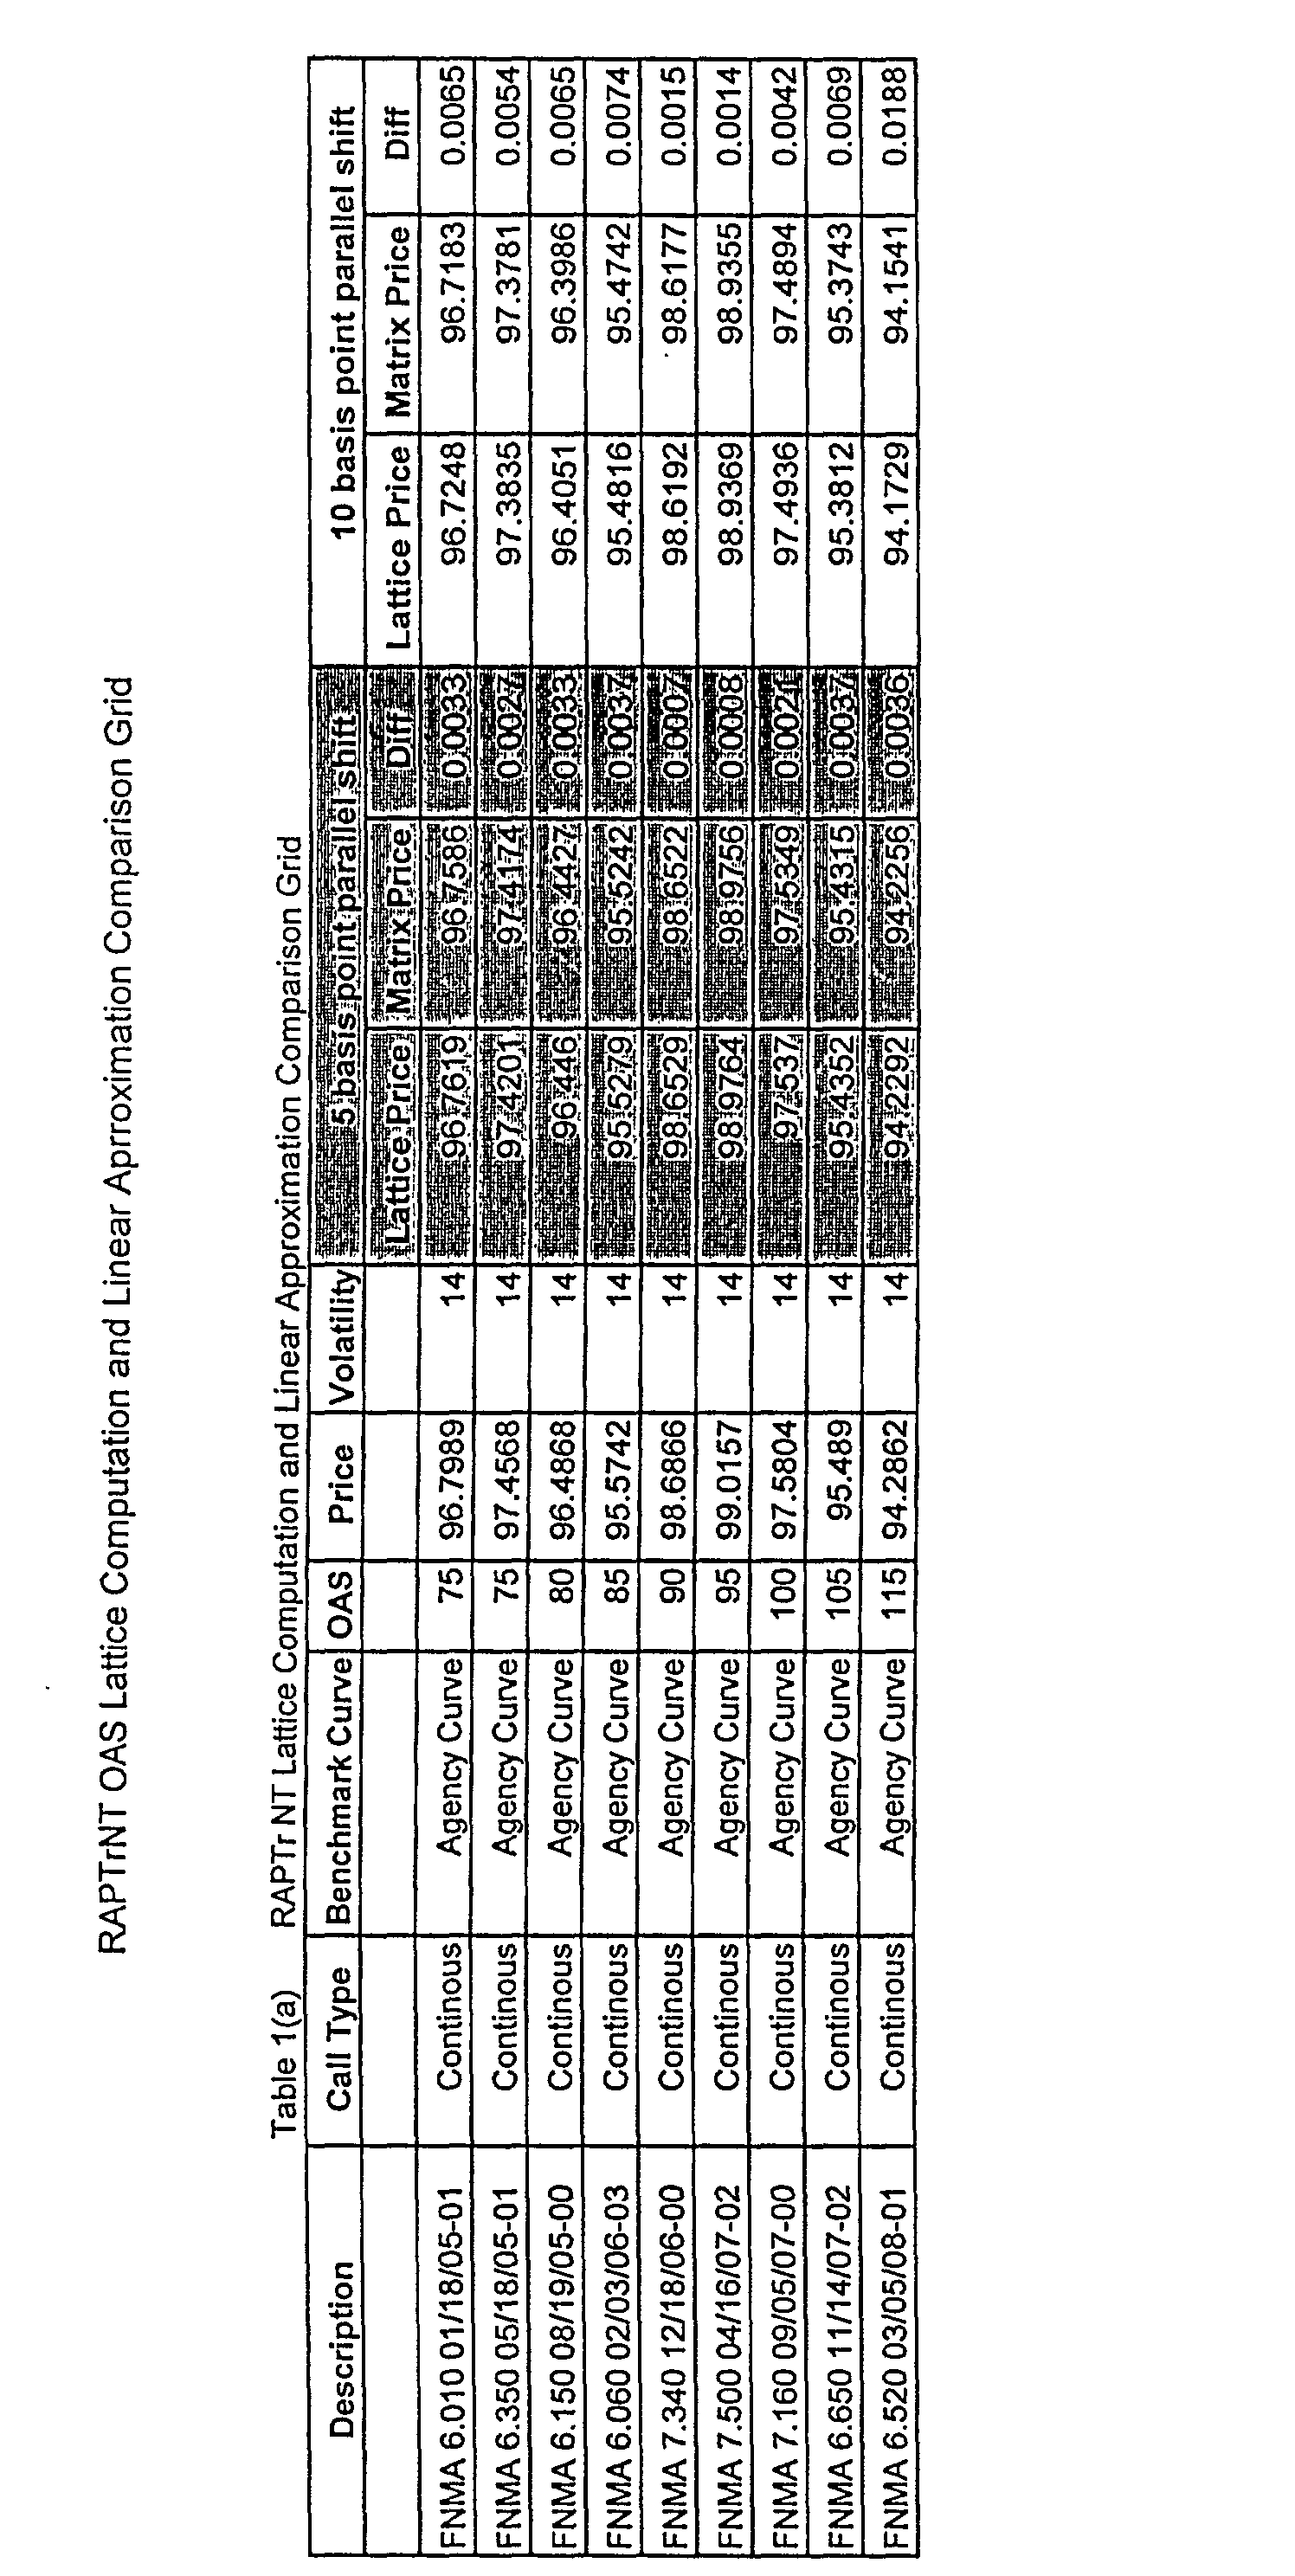 Real time valuation of option-embedded coupon bearing bonds by option adjusted spread and linear approximation